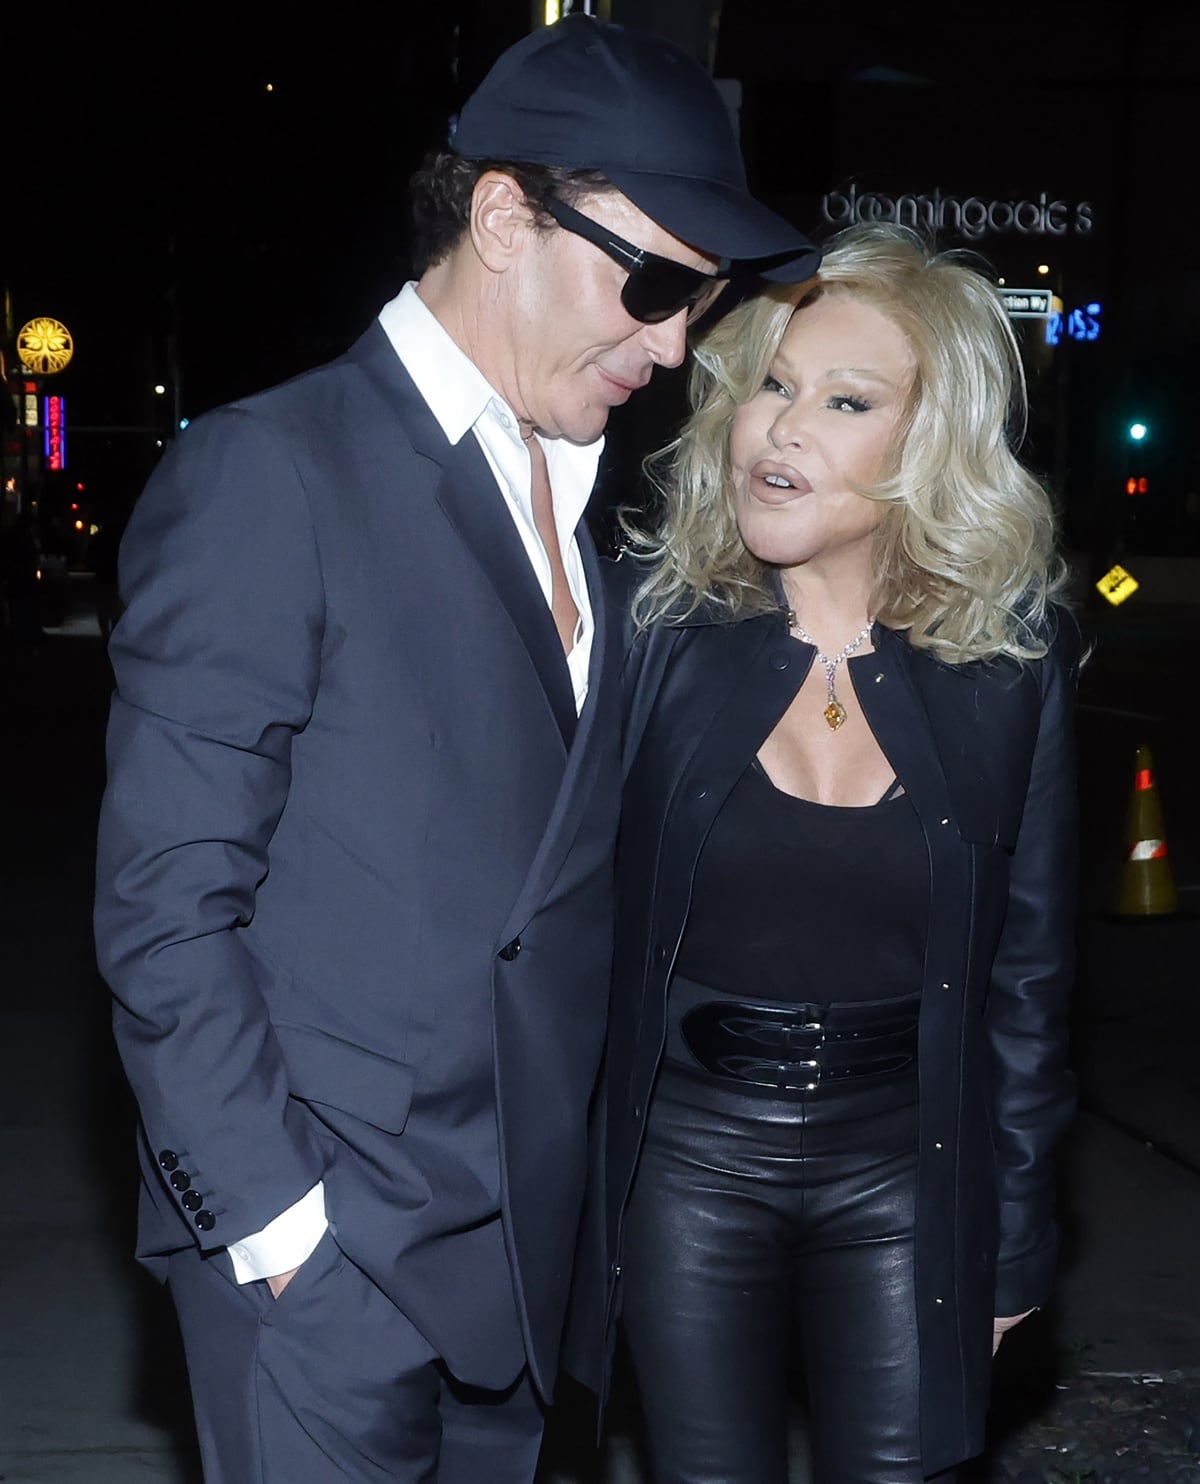 Lloyd Klein and Jocelyn Wildenstein heading out to dinner together in Los Angeles